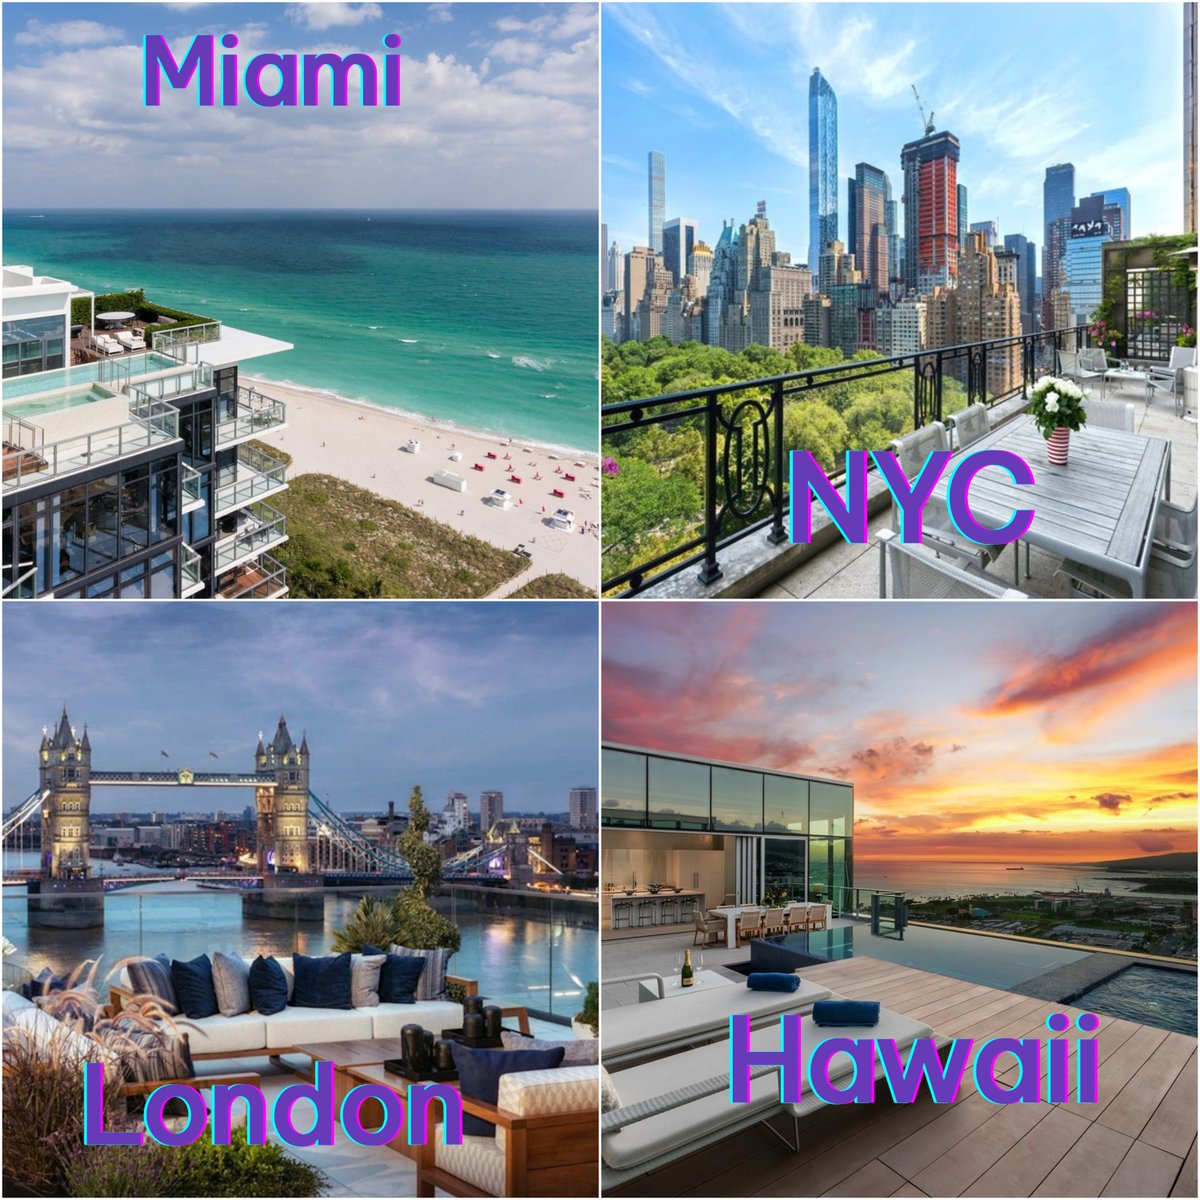 You've got a luxury penthouse to use whenever you want, for one year, in one of these cities, all expenses paid. Which city would be your pick? 👇